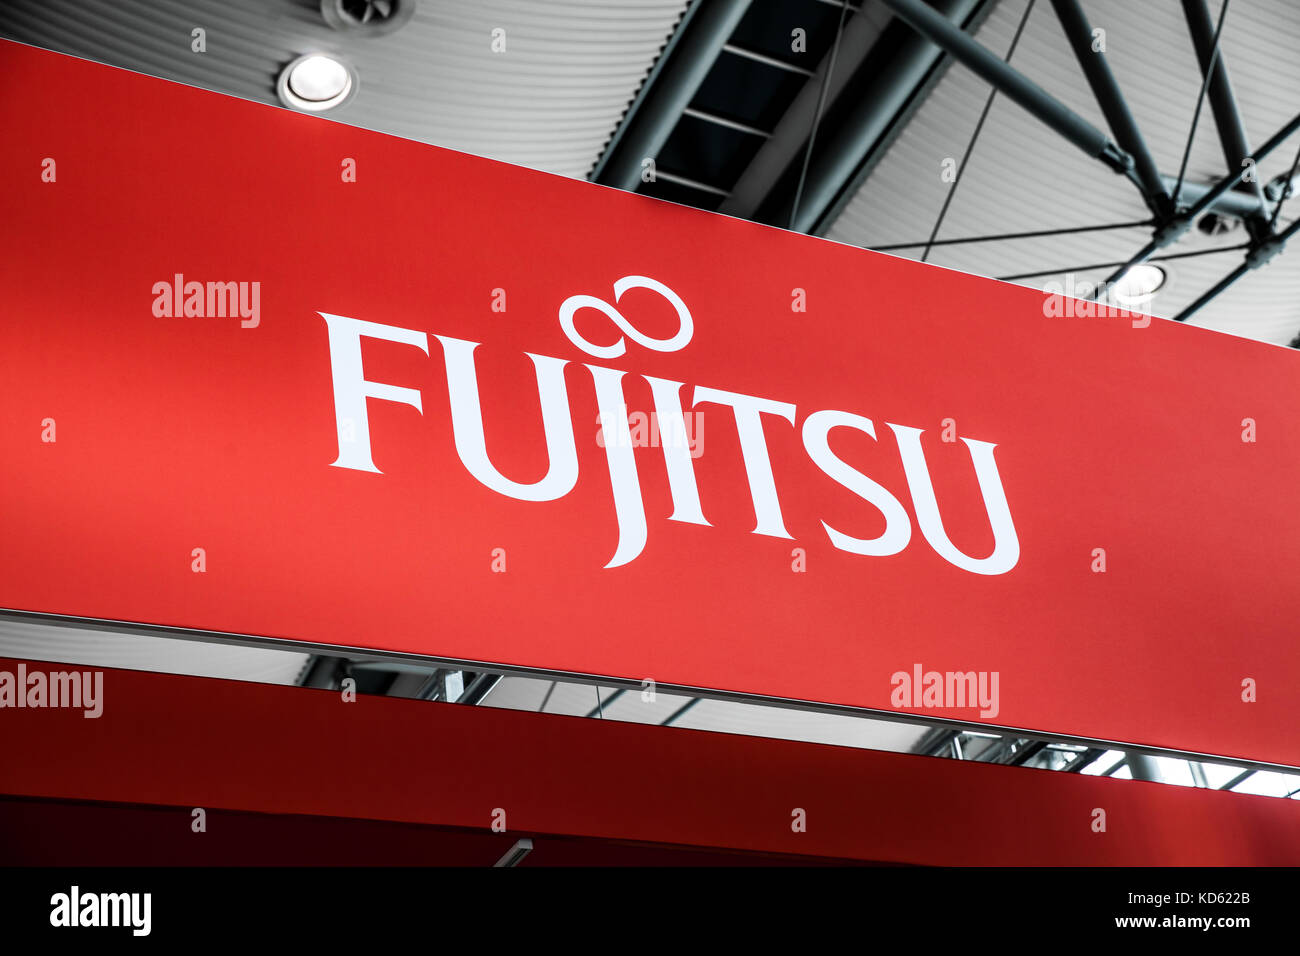 Fujitsu company logo sign on exhibition fair Cebit 2017 in Hannover Messe, Germany Stock Photo